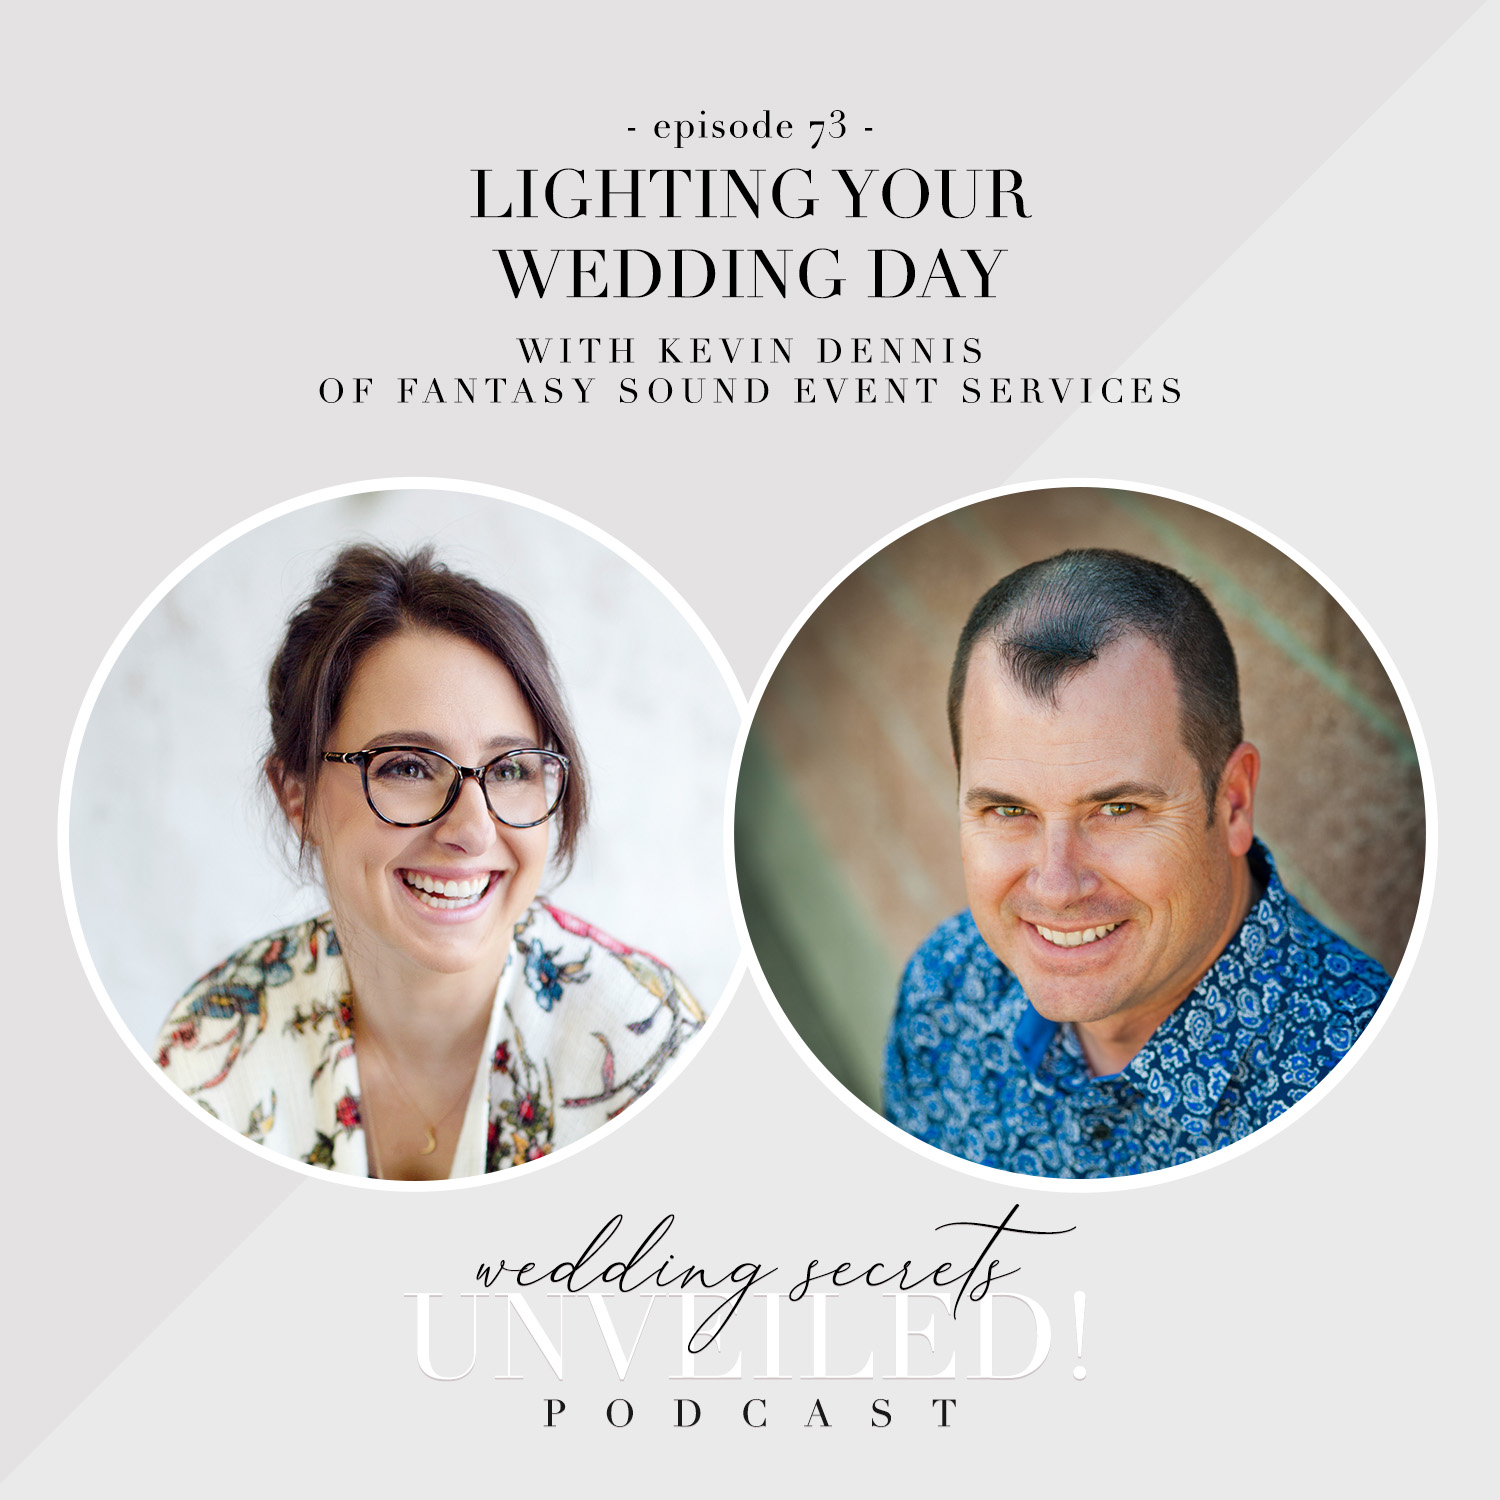 Lighting Your Wedding Day: interview with Kevin Dennis of Fantasy Sound Event Services on Wedding Secrets Unveiled! Podcast